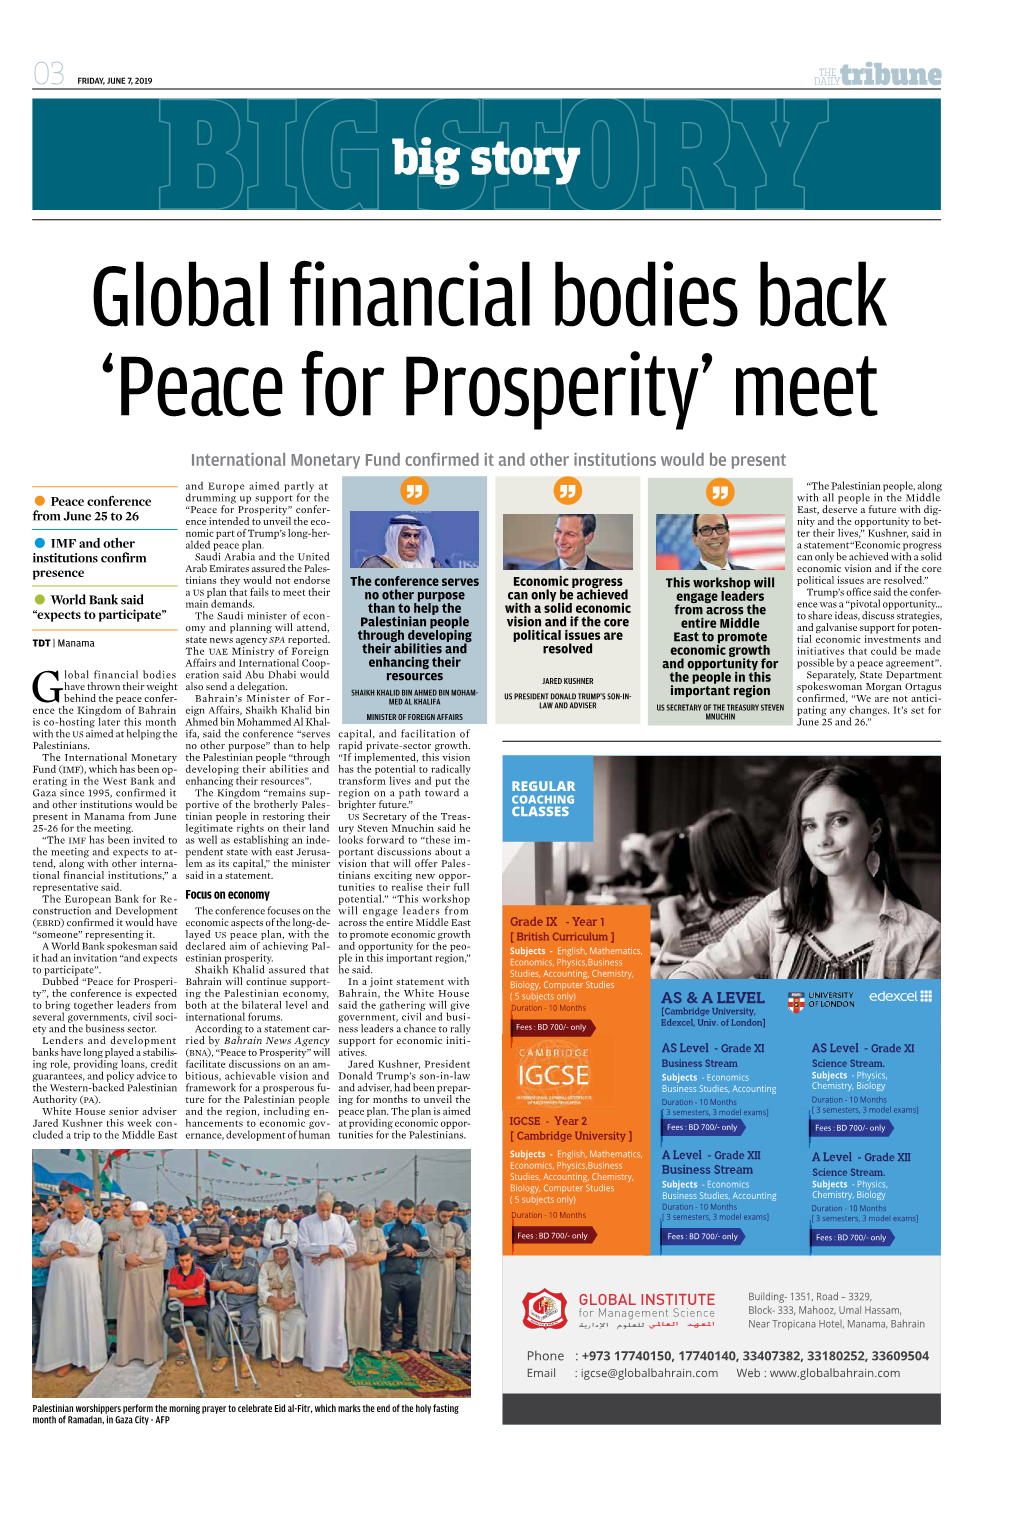 Big Story Global Financial Bodies Back ‘Peace for Prosperity’ Meet International Monetary Fund Confirmed It and Other Institutions Would Be Present